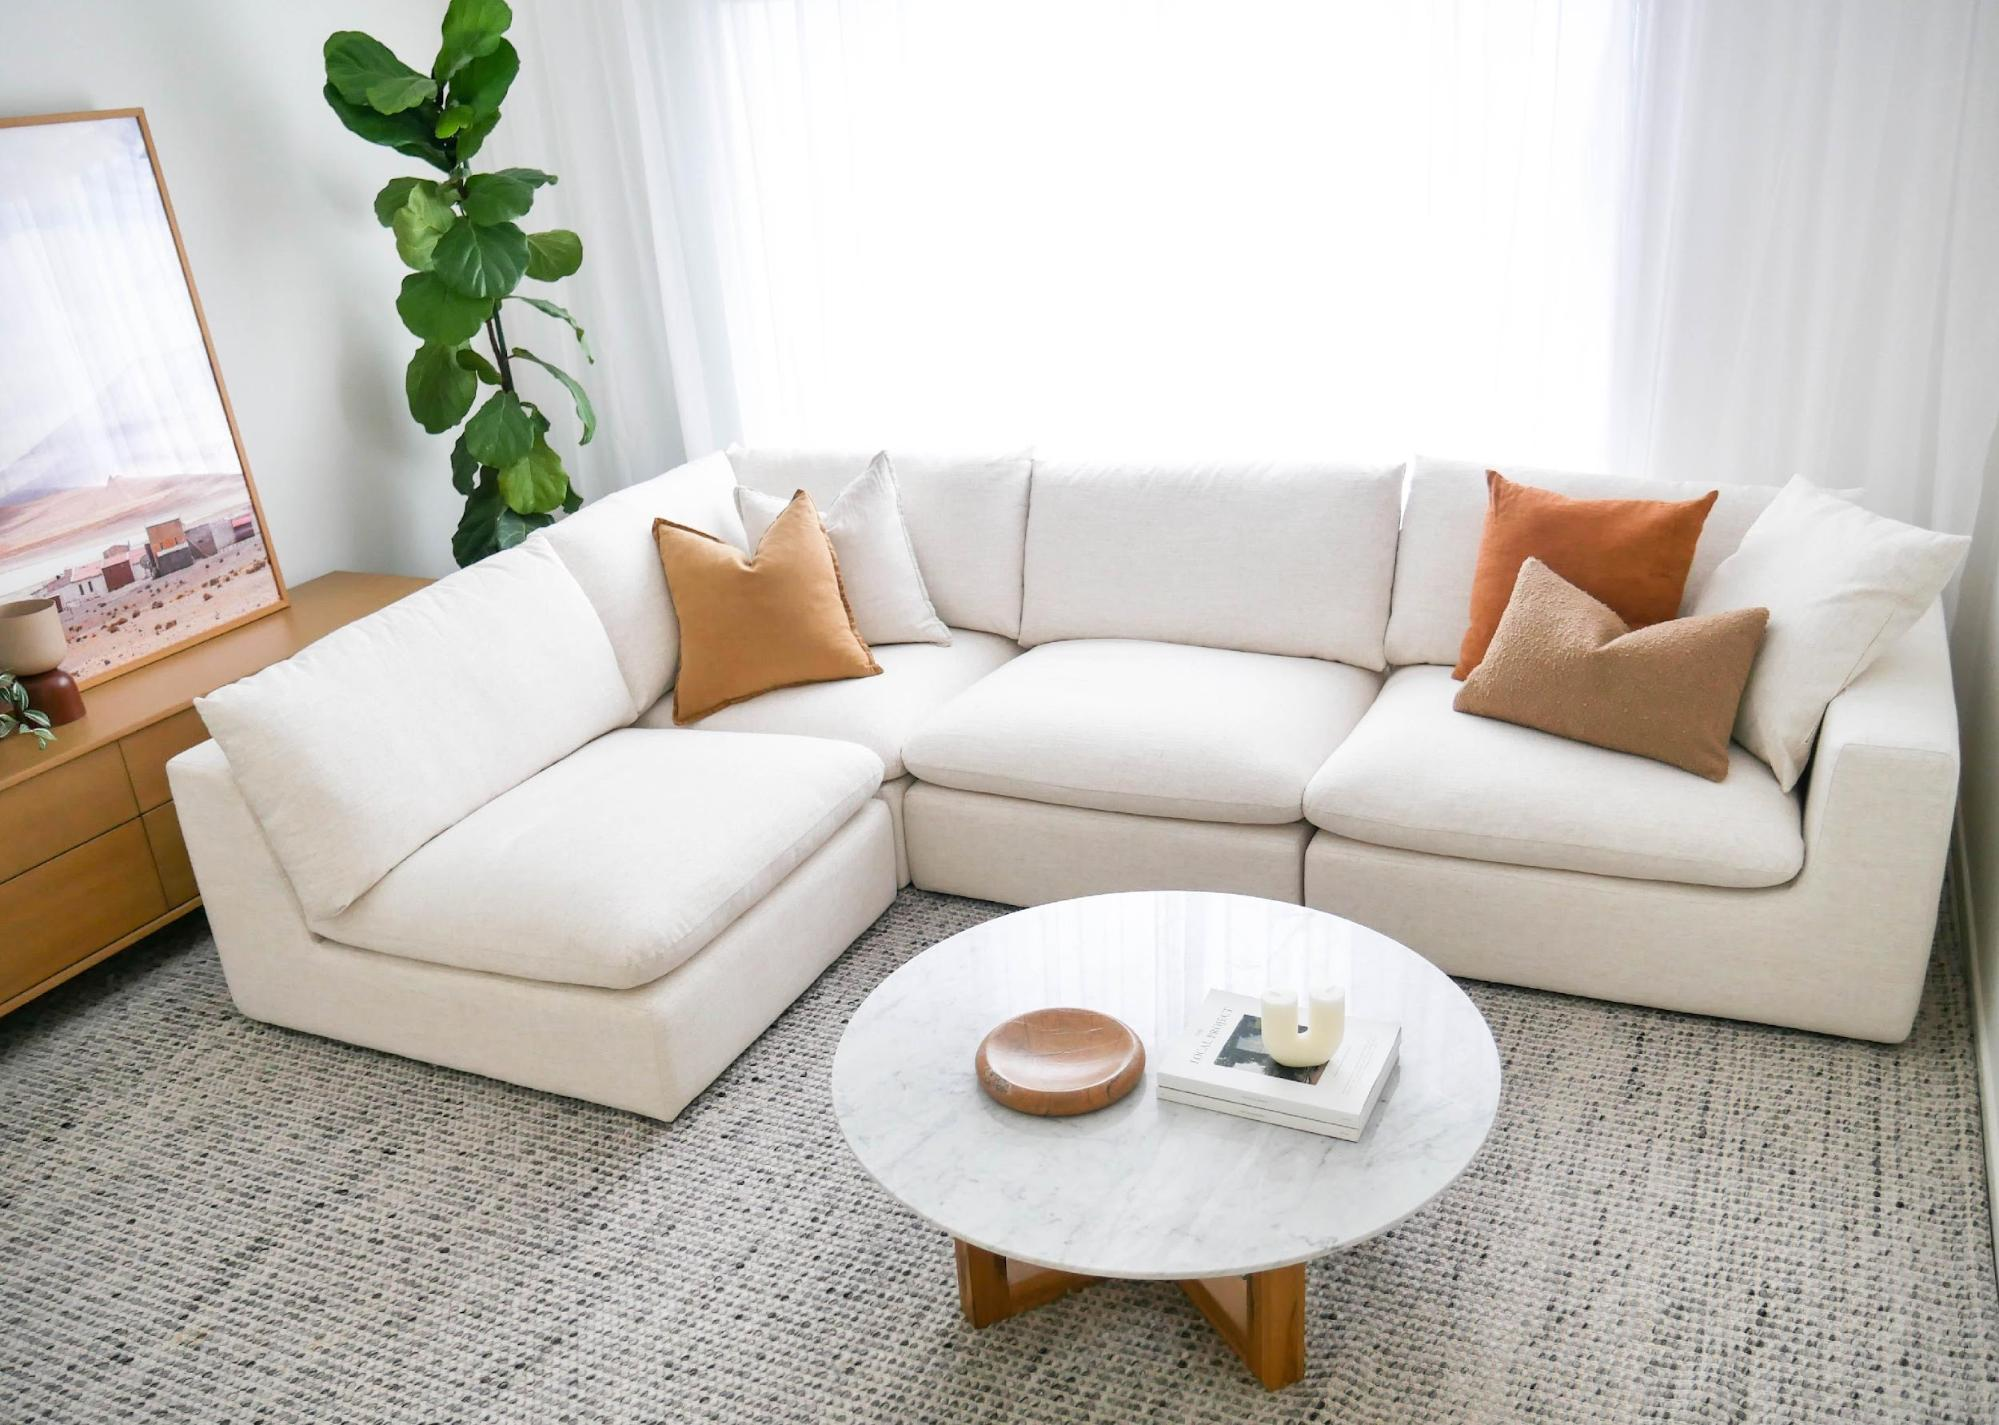 Include cleaning your entire sofa into your routine cleaning to have a clean couch